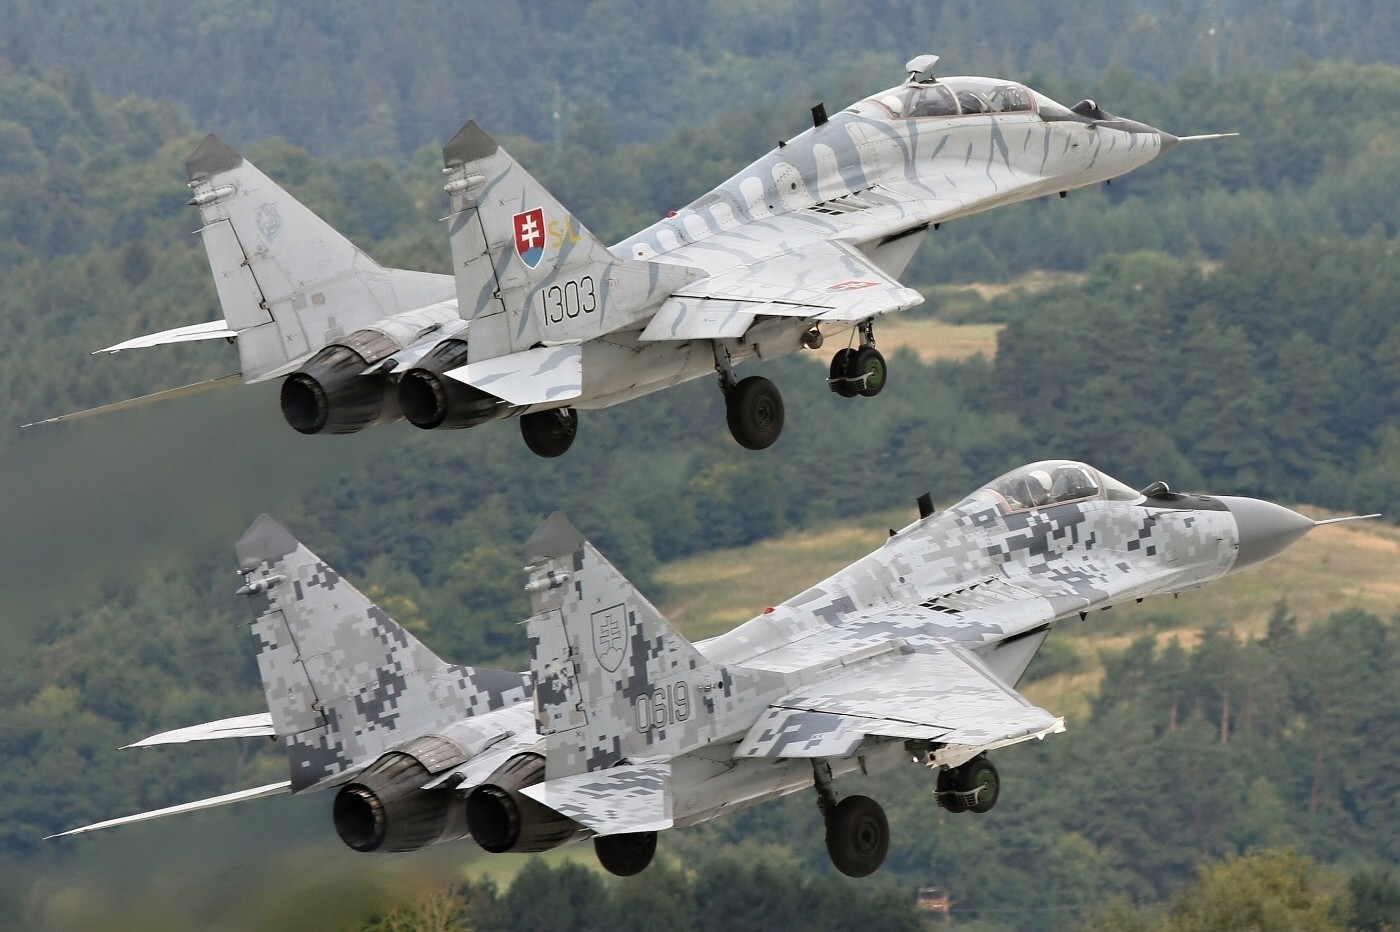 General 1400x932 military aircraft camouflage Slovakia aircraft vehicle military vehicle military numbers Mikoyan MiG-29 slovak air force air force Russian/Soviet aircraft Mikoyan-Gurevich